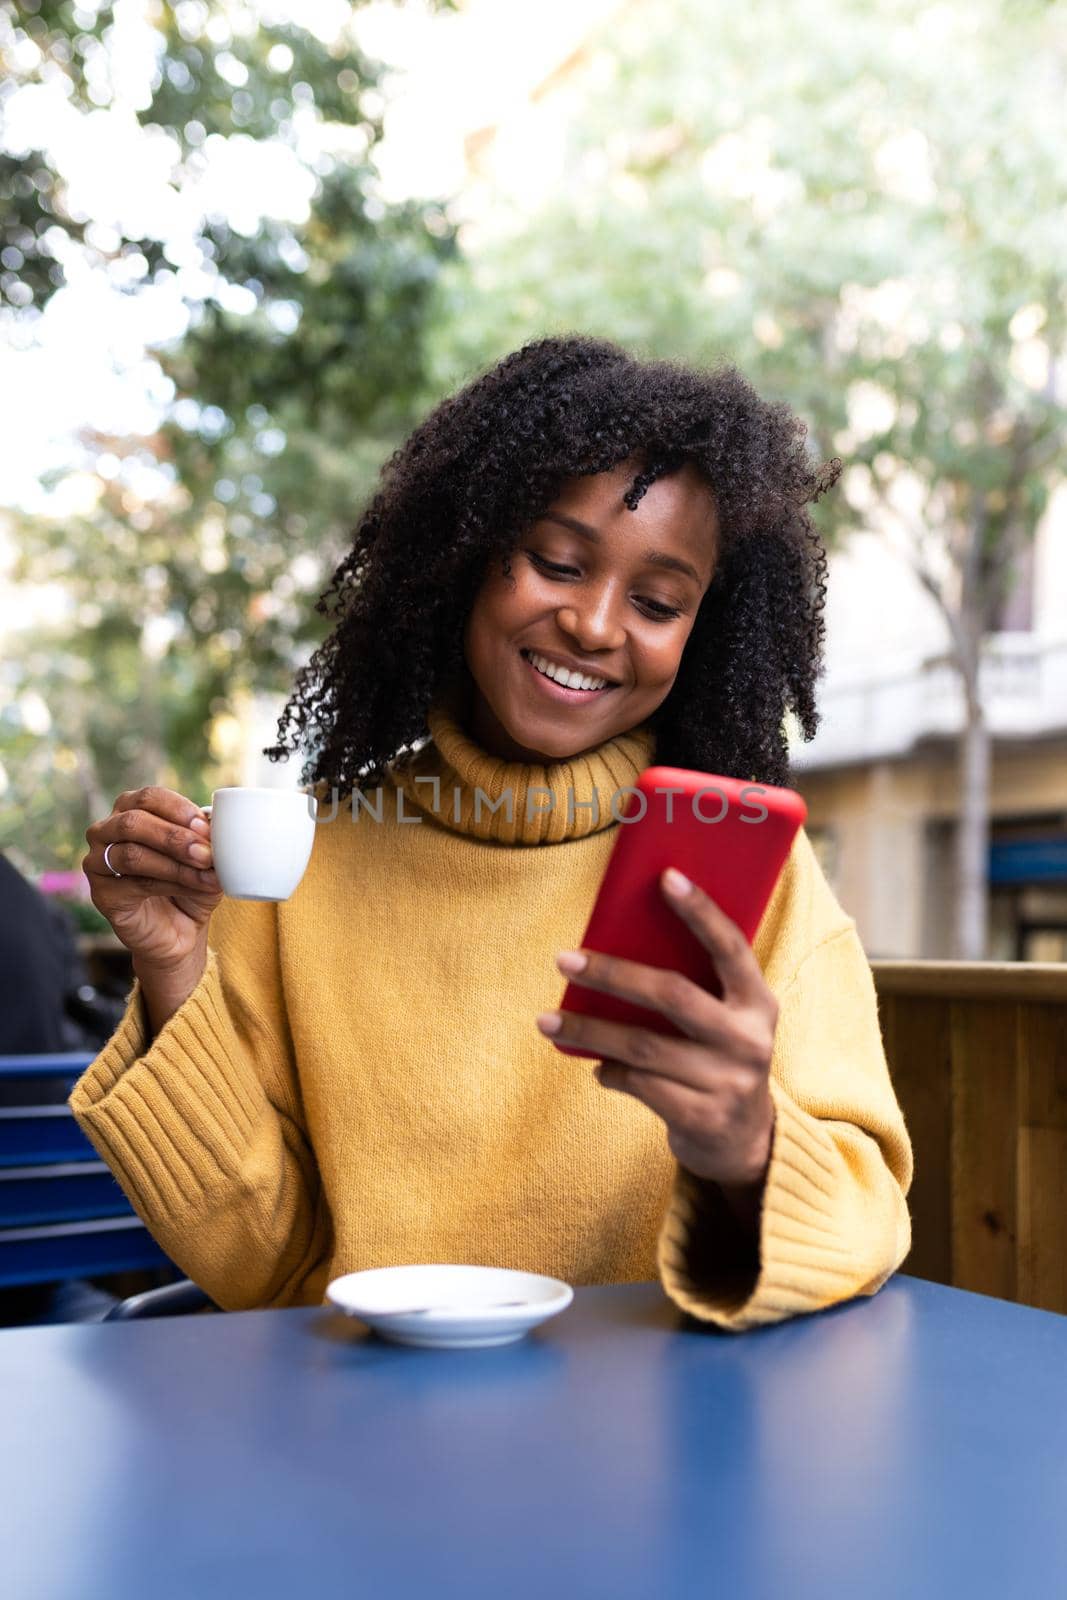 Happy young African American woman using mobile phone drinks coffee in an outdoors coffee shop terrace. Vertical image. by Hoverstock